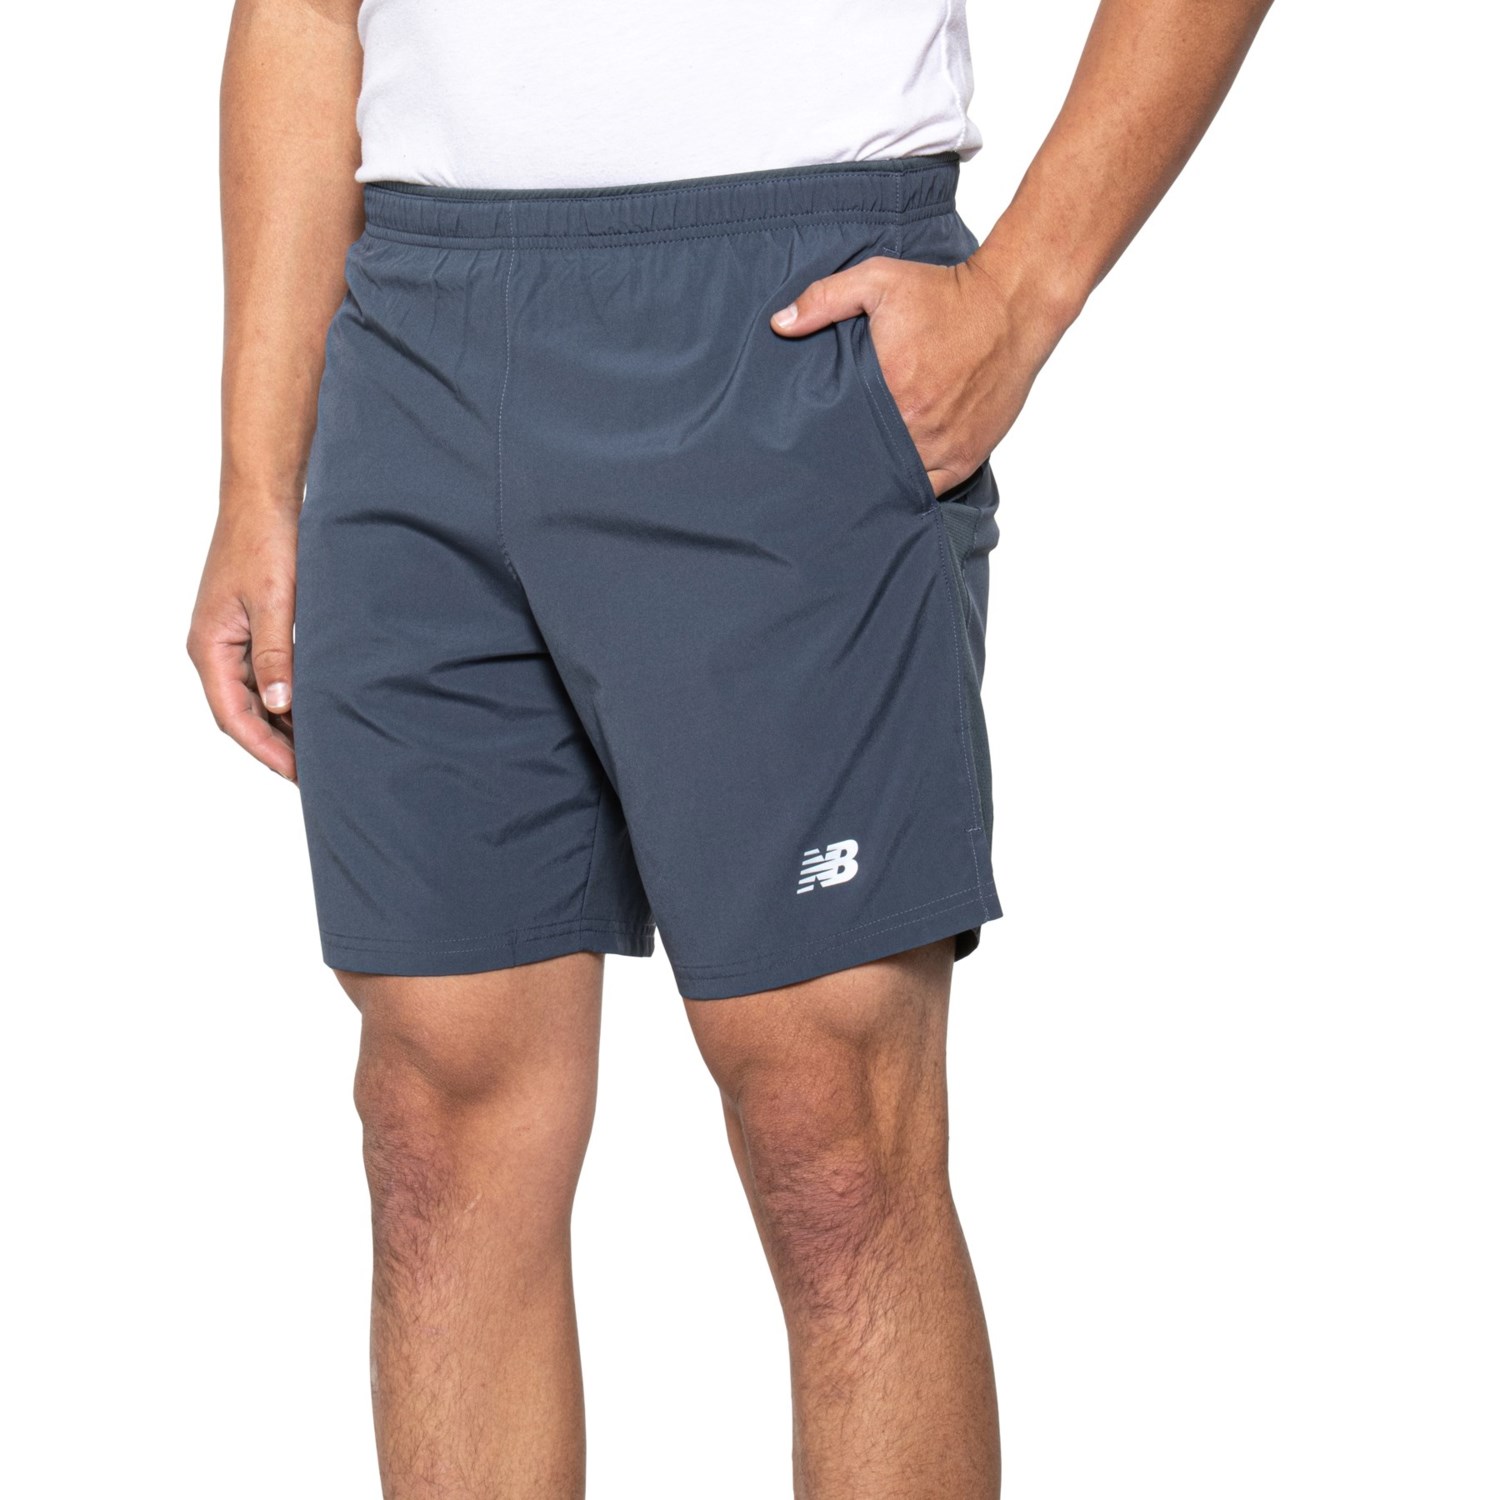 New Balance Woven Shorts - 7”, Built-In Brief (For Men)